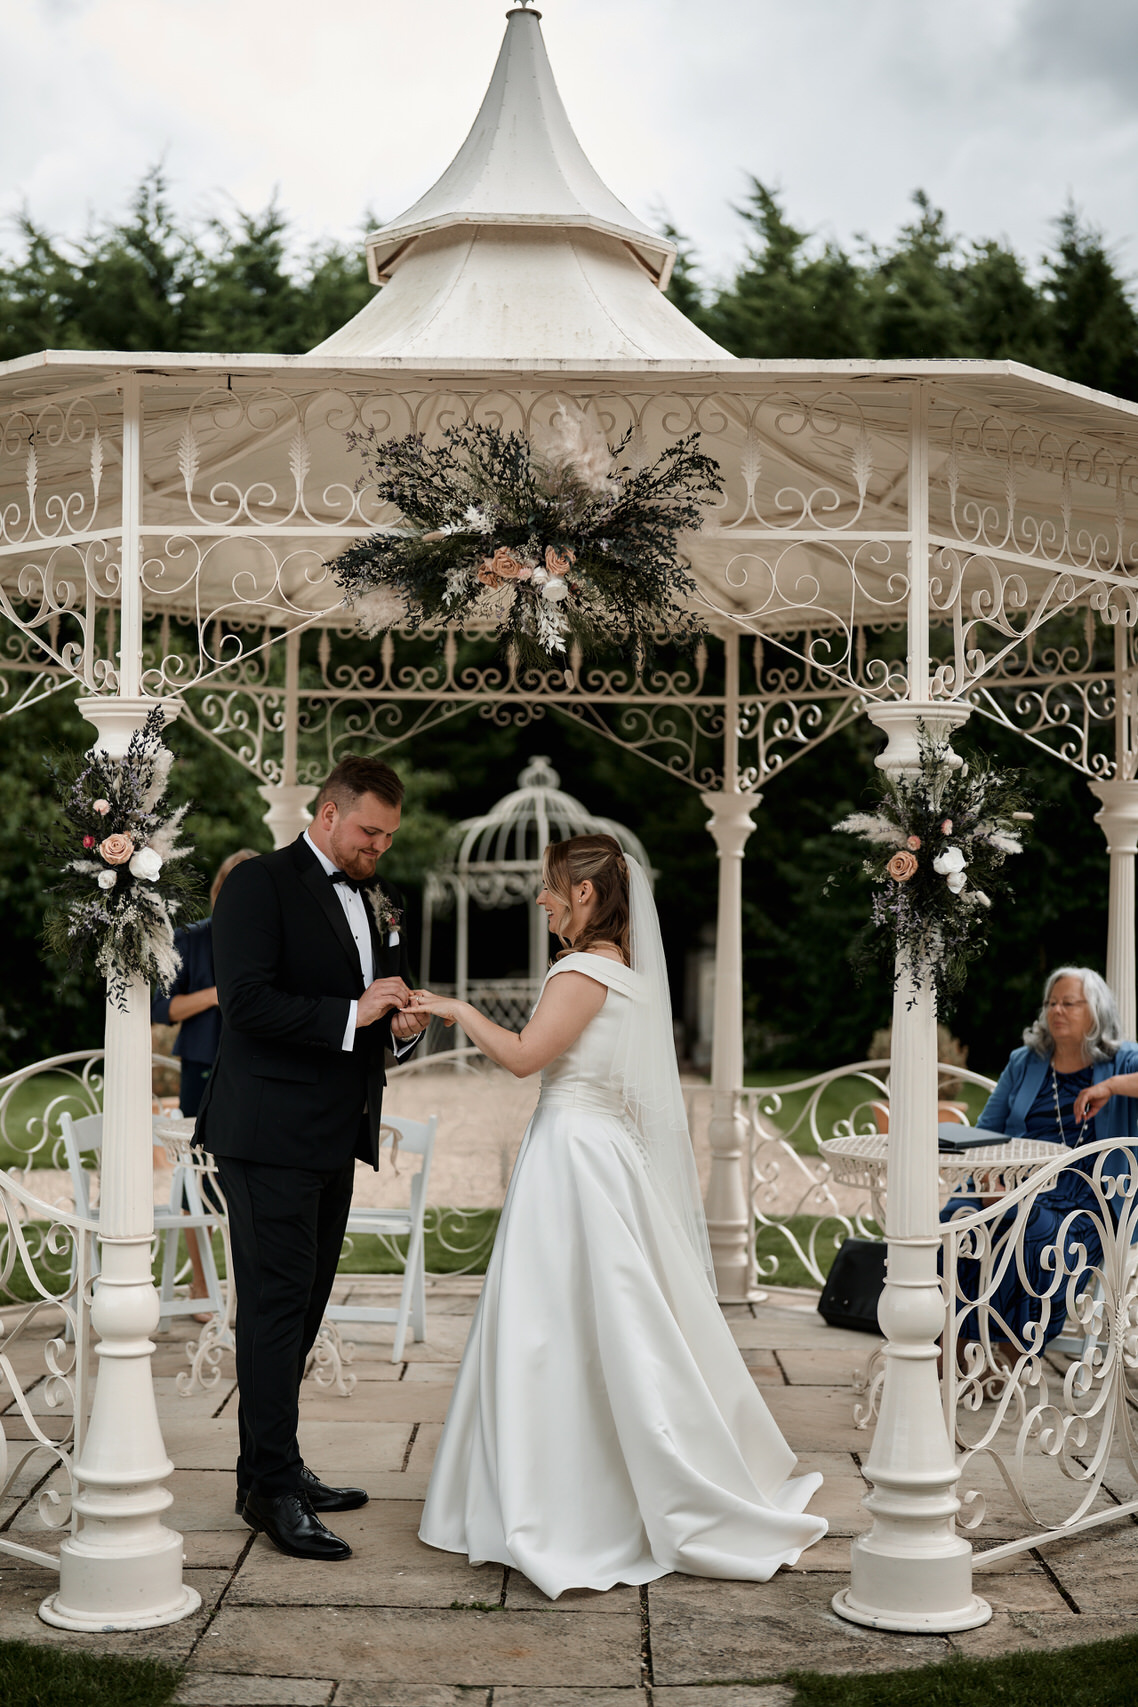 A couple getting married say their promises to each other in a pavilion.